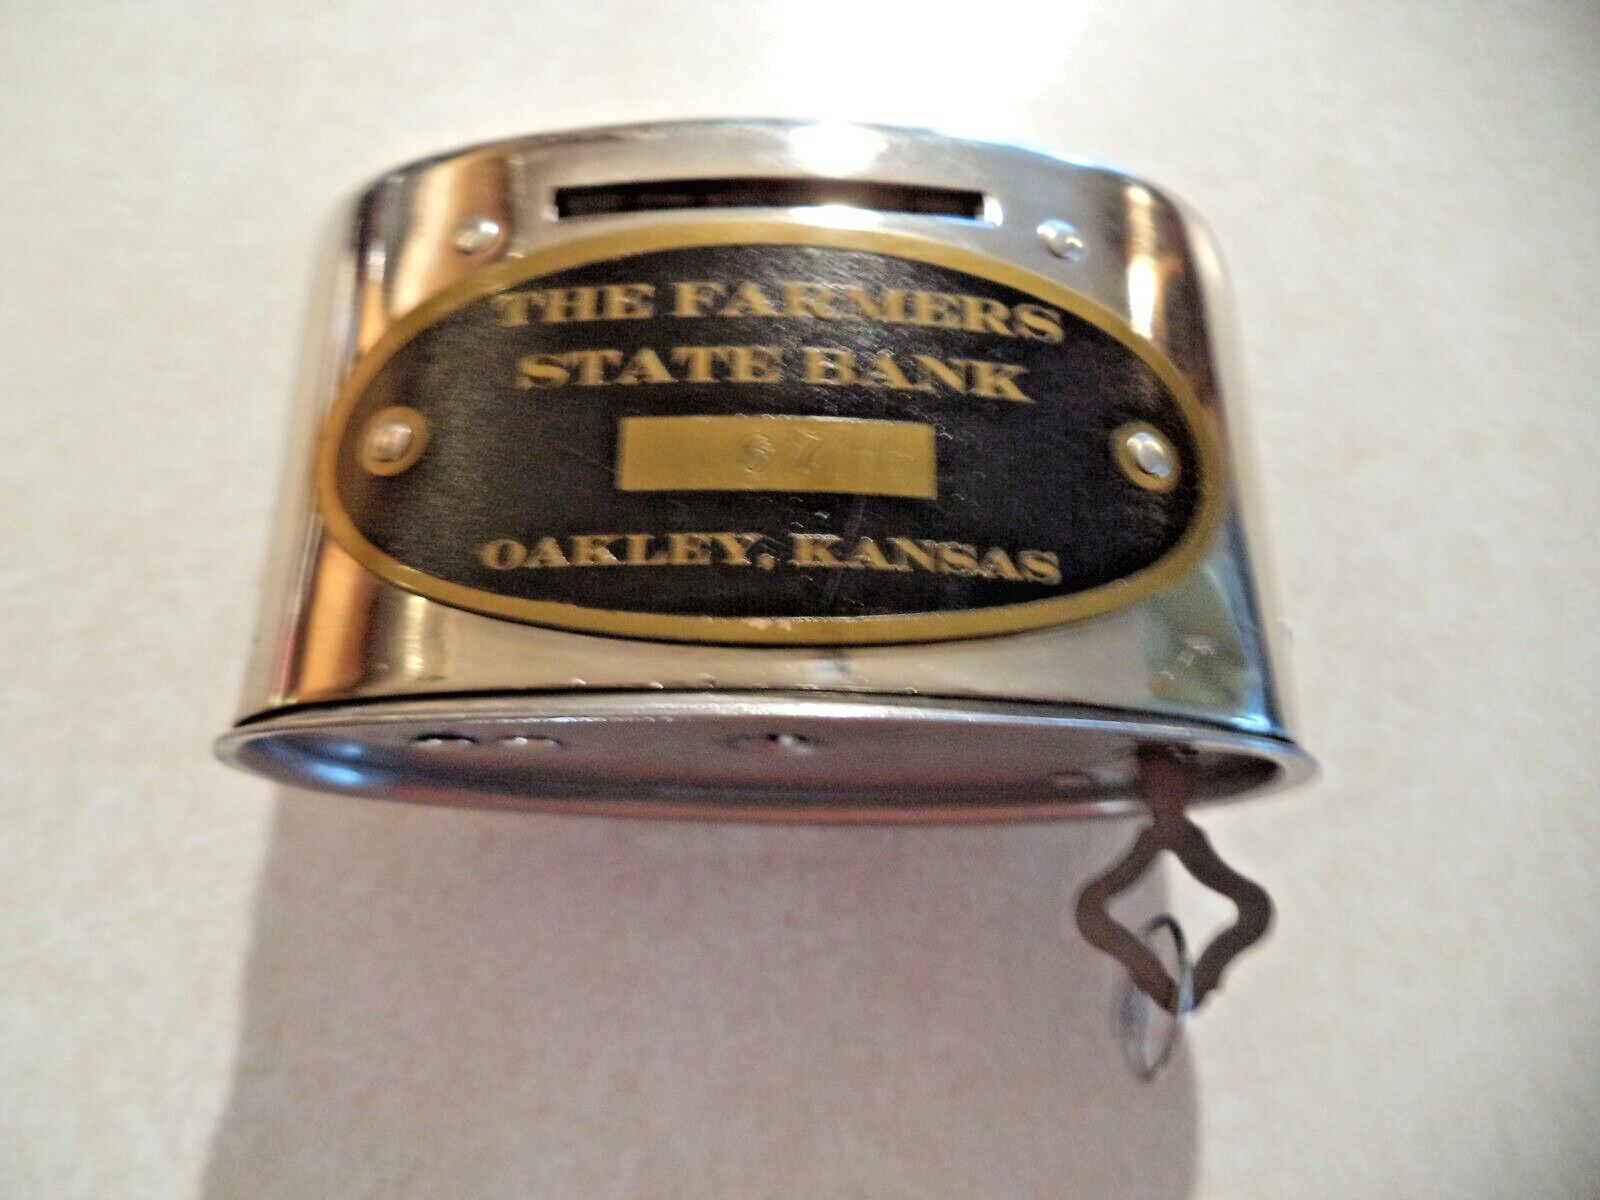 Handle Coin Savings Bank # 67 The Farmers State Bank Oakley, Kansas  with 1 Key